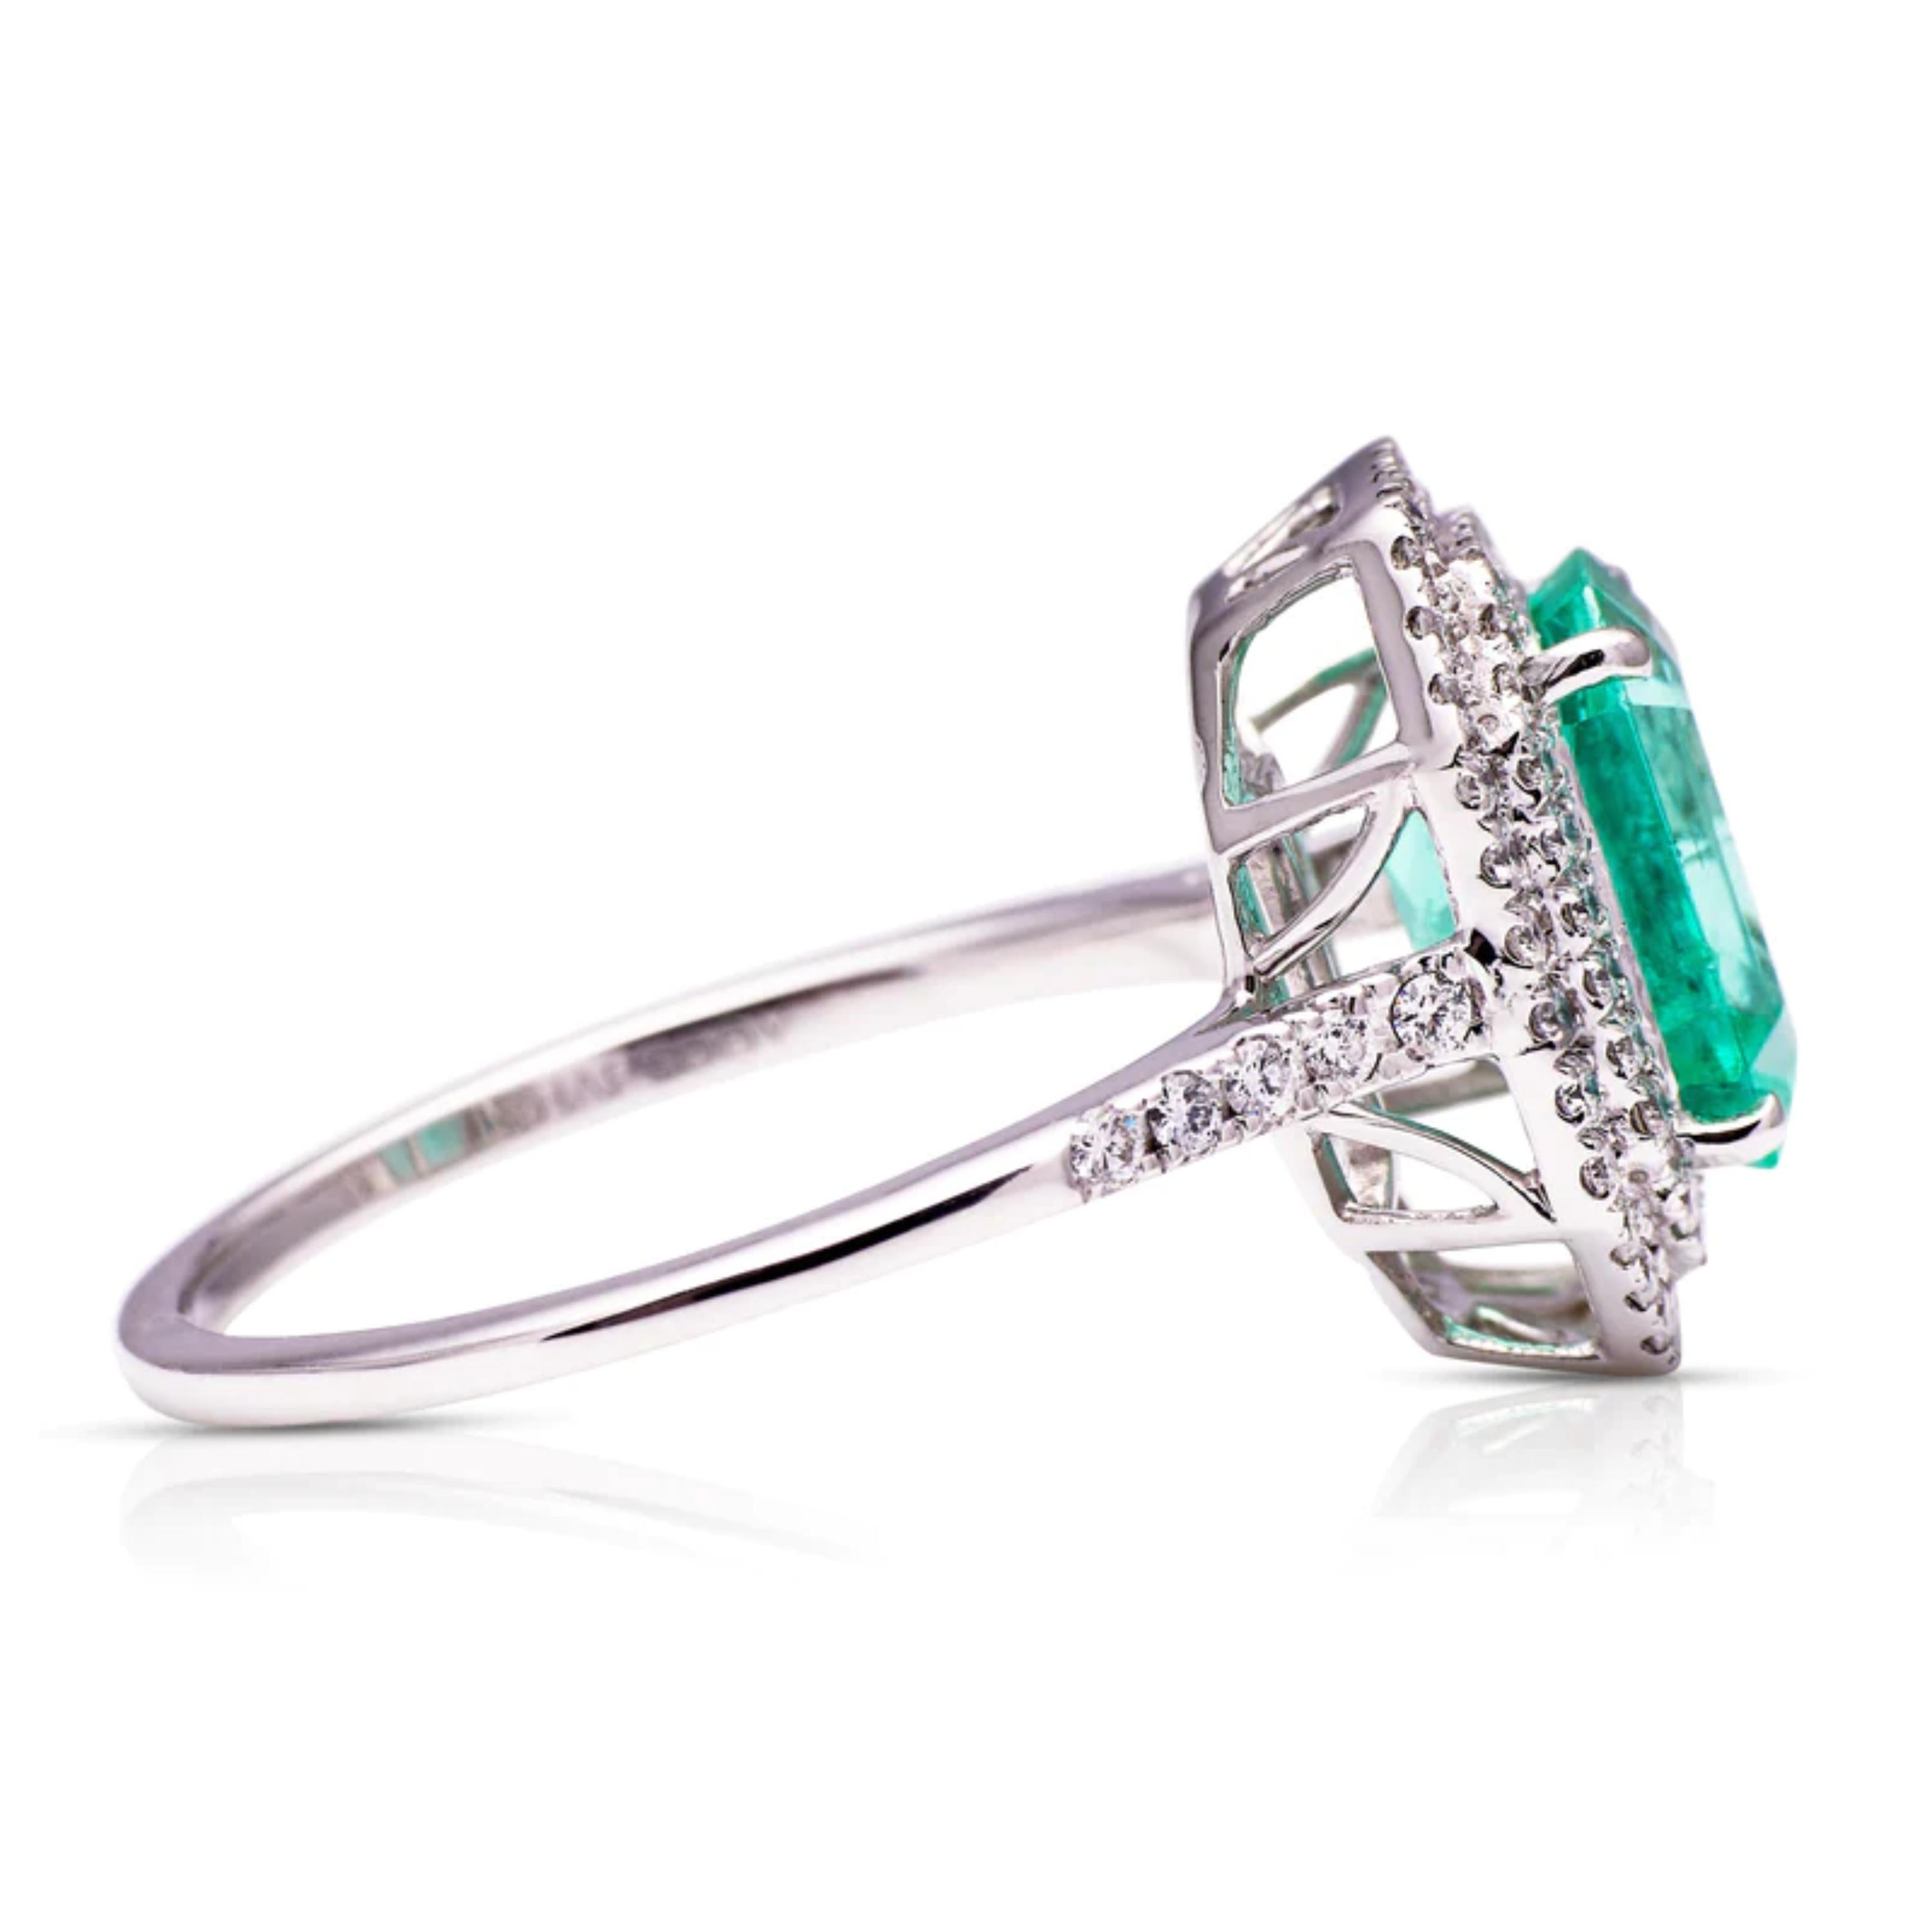 2.50 Carat Colombian Emerald Diamond Engagement Ring Halo Emerald Cocktail Ring

A stunning ring featuring IGI/GIA Certified 2.50 Carat Natural Emerald and 0.40 Carat of Diamond Accents set in 18K Solid Gold.

Emeralds are highly valued for their